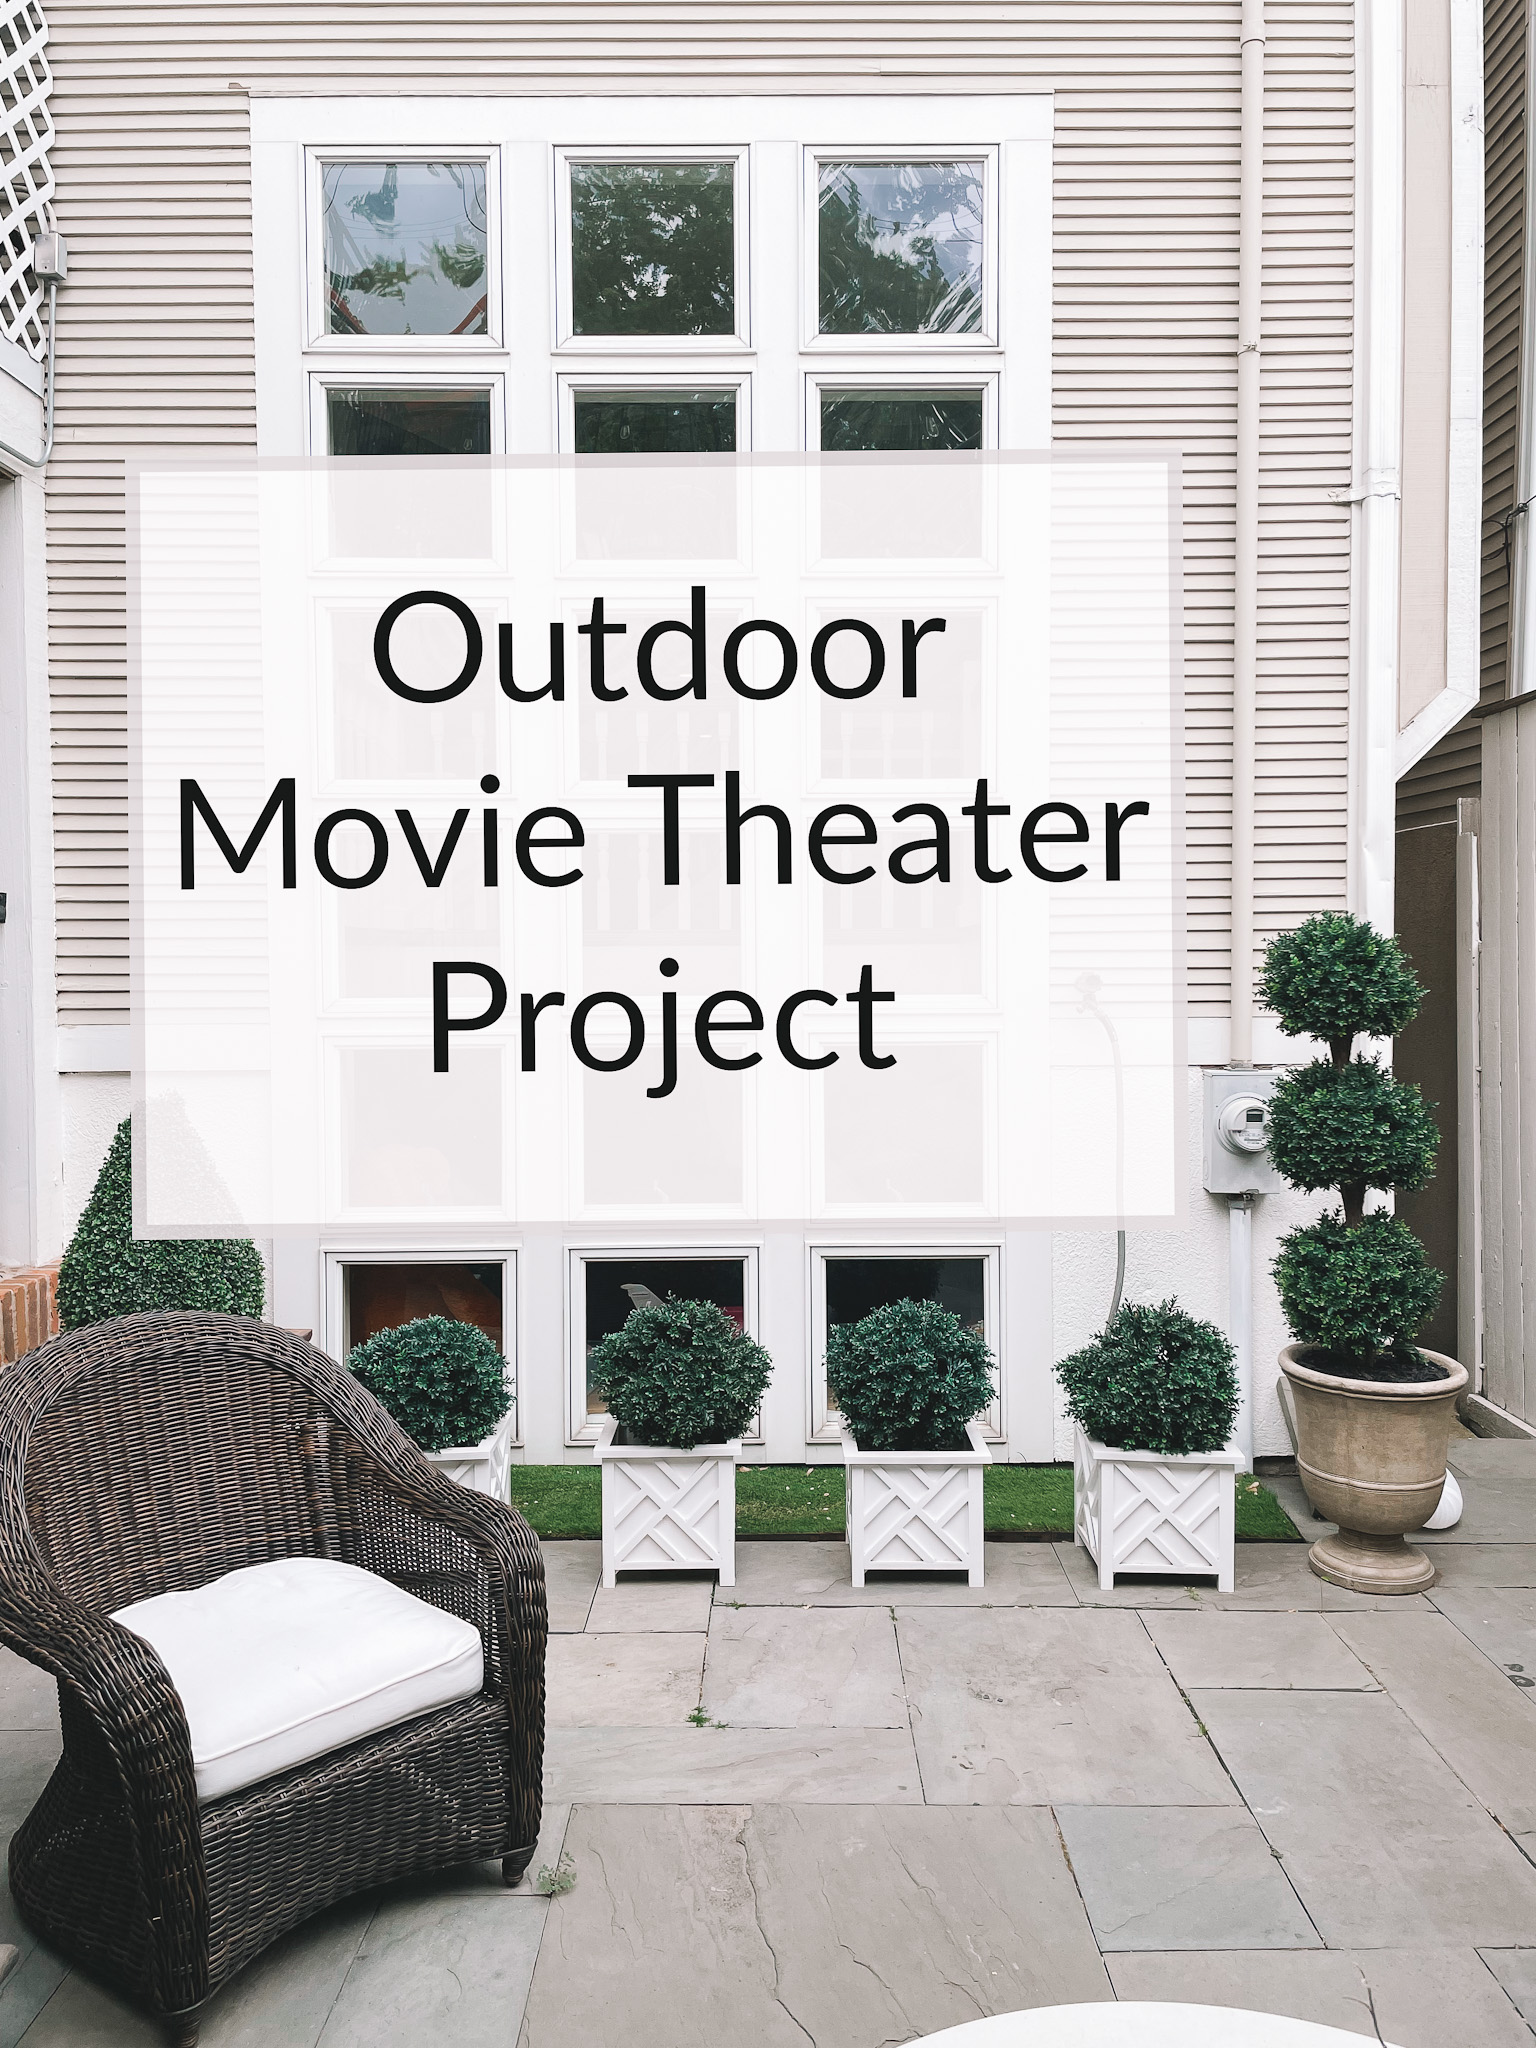 Mitchs Outdoor Movie Theater Project